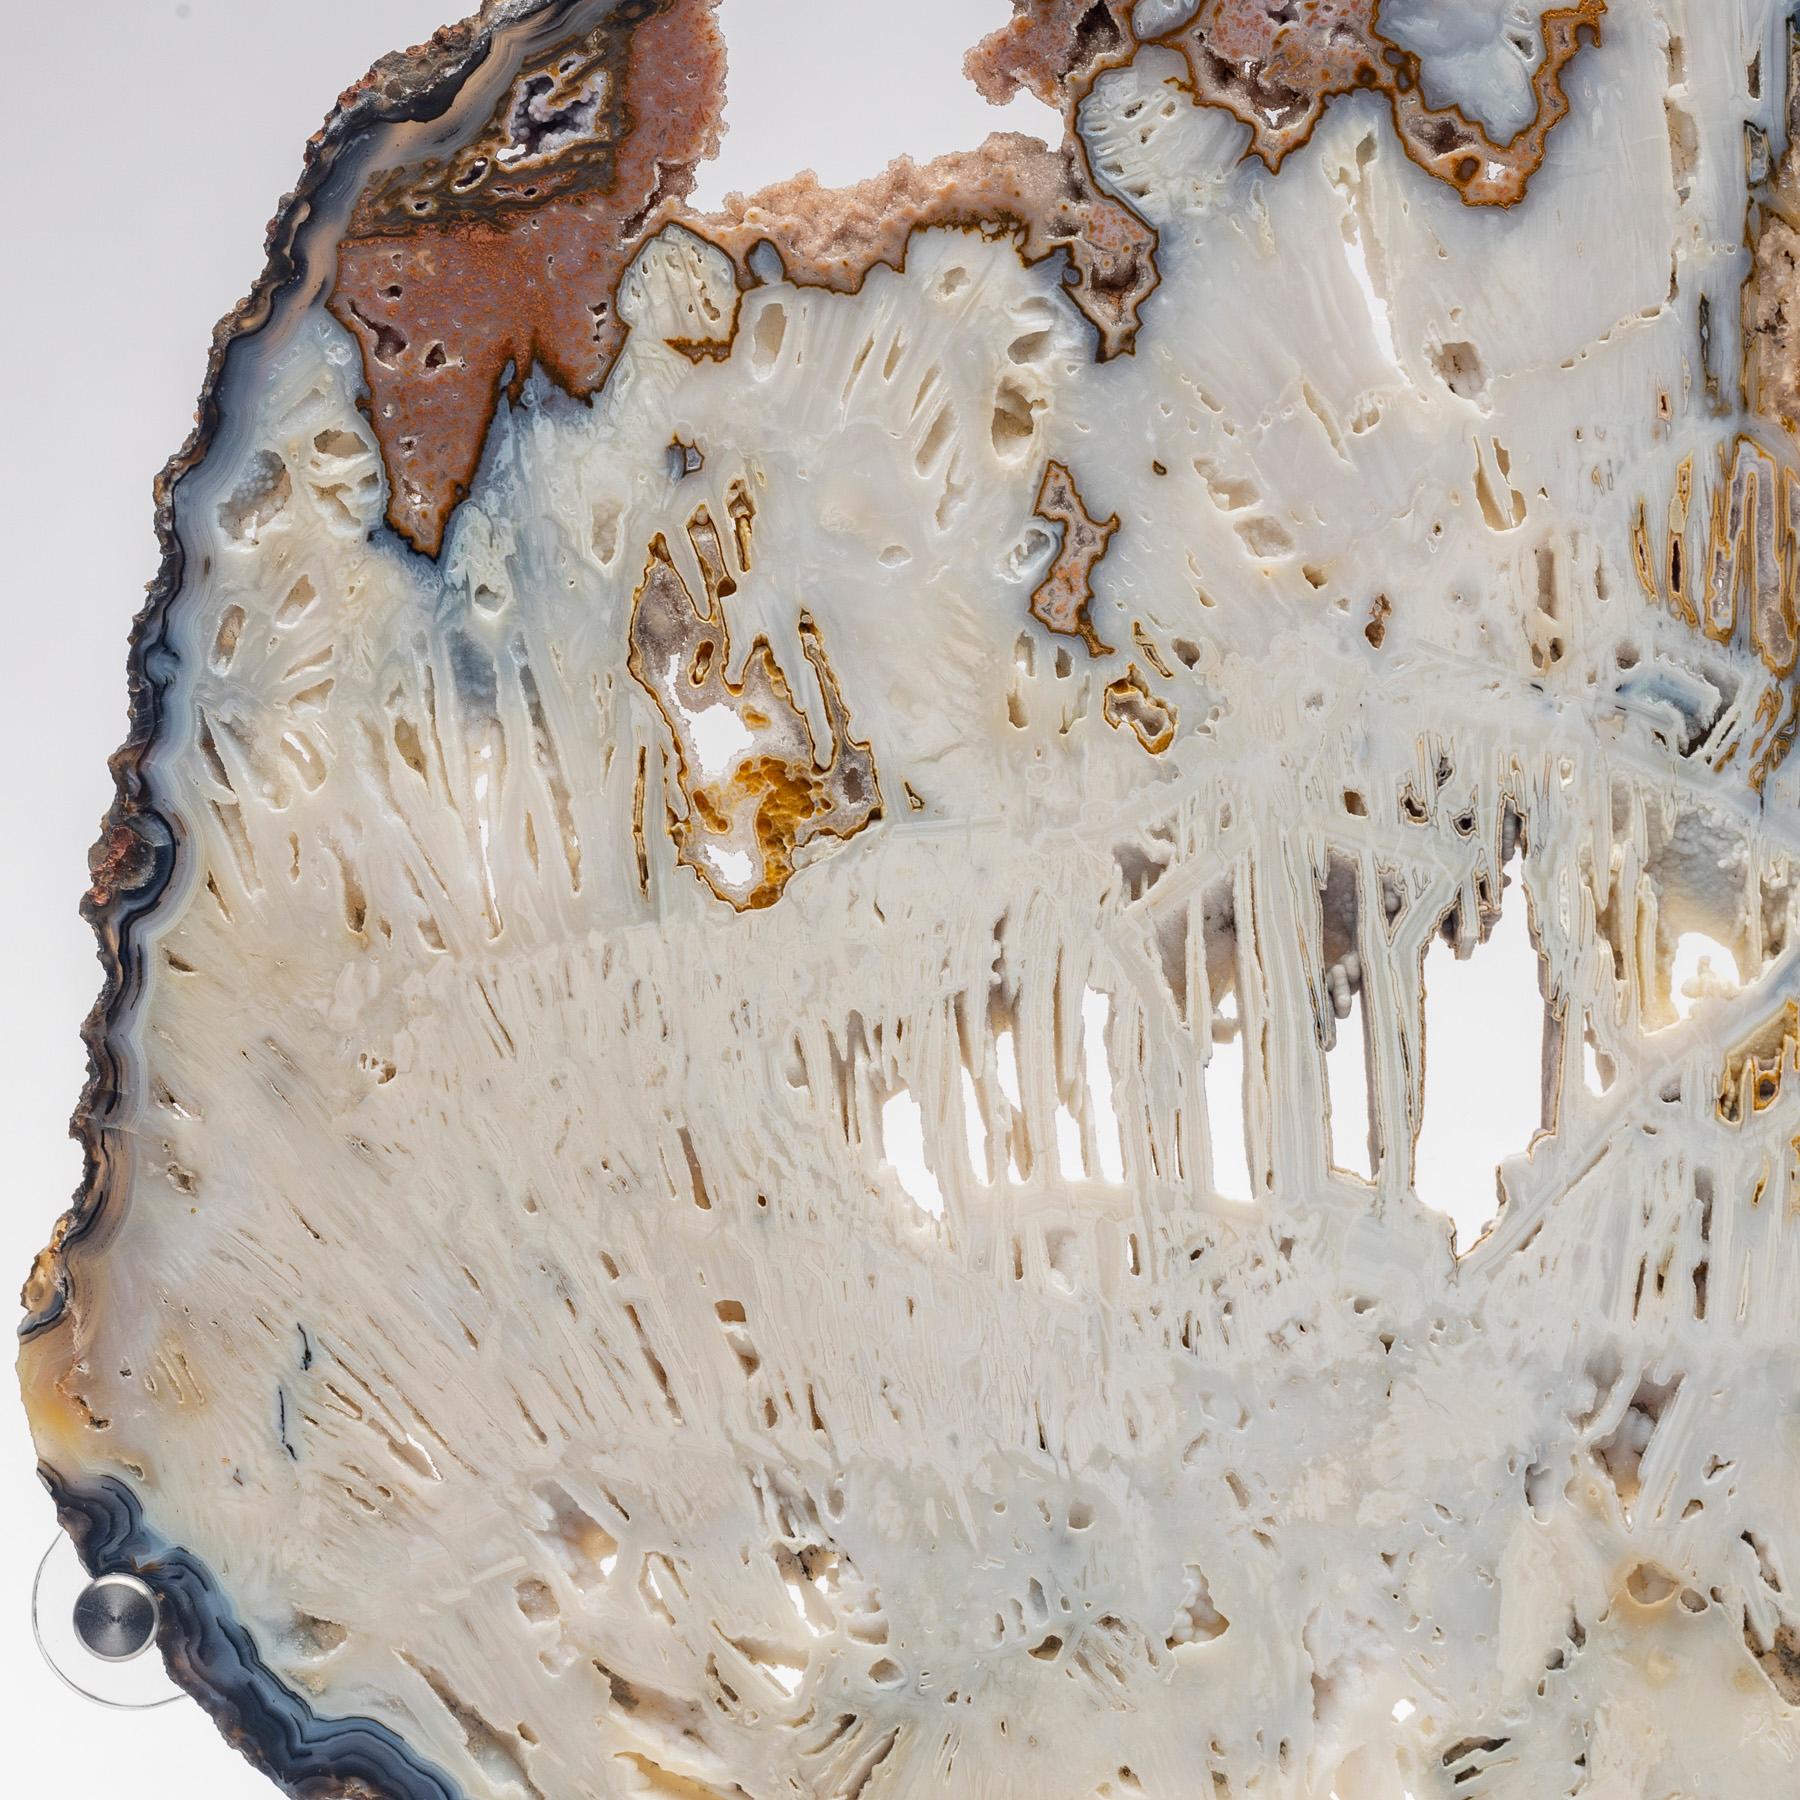 Contemporary Brazilian Banded Agate Slab with Crystallizations on a Custom Acrylic Stand